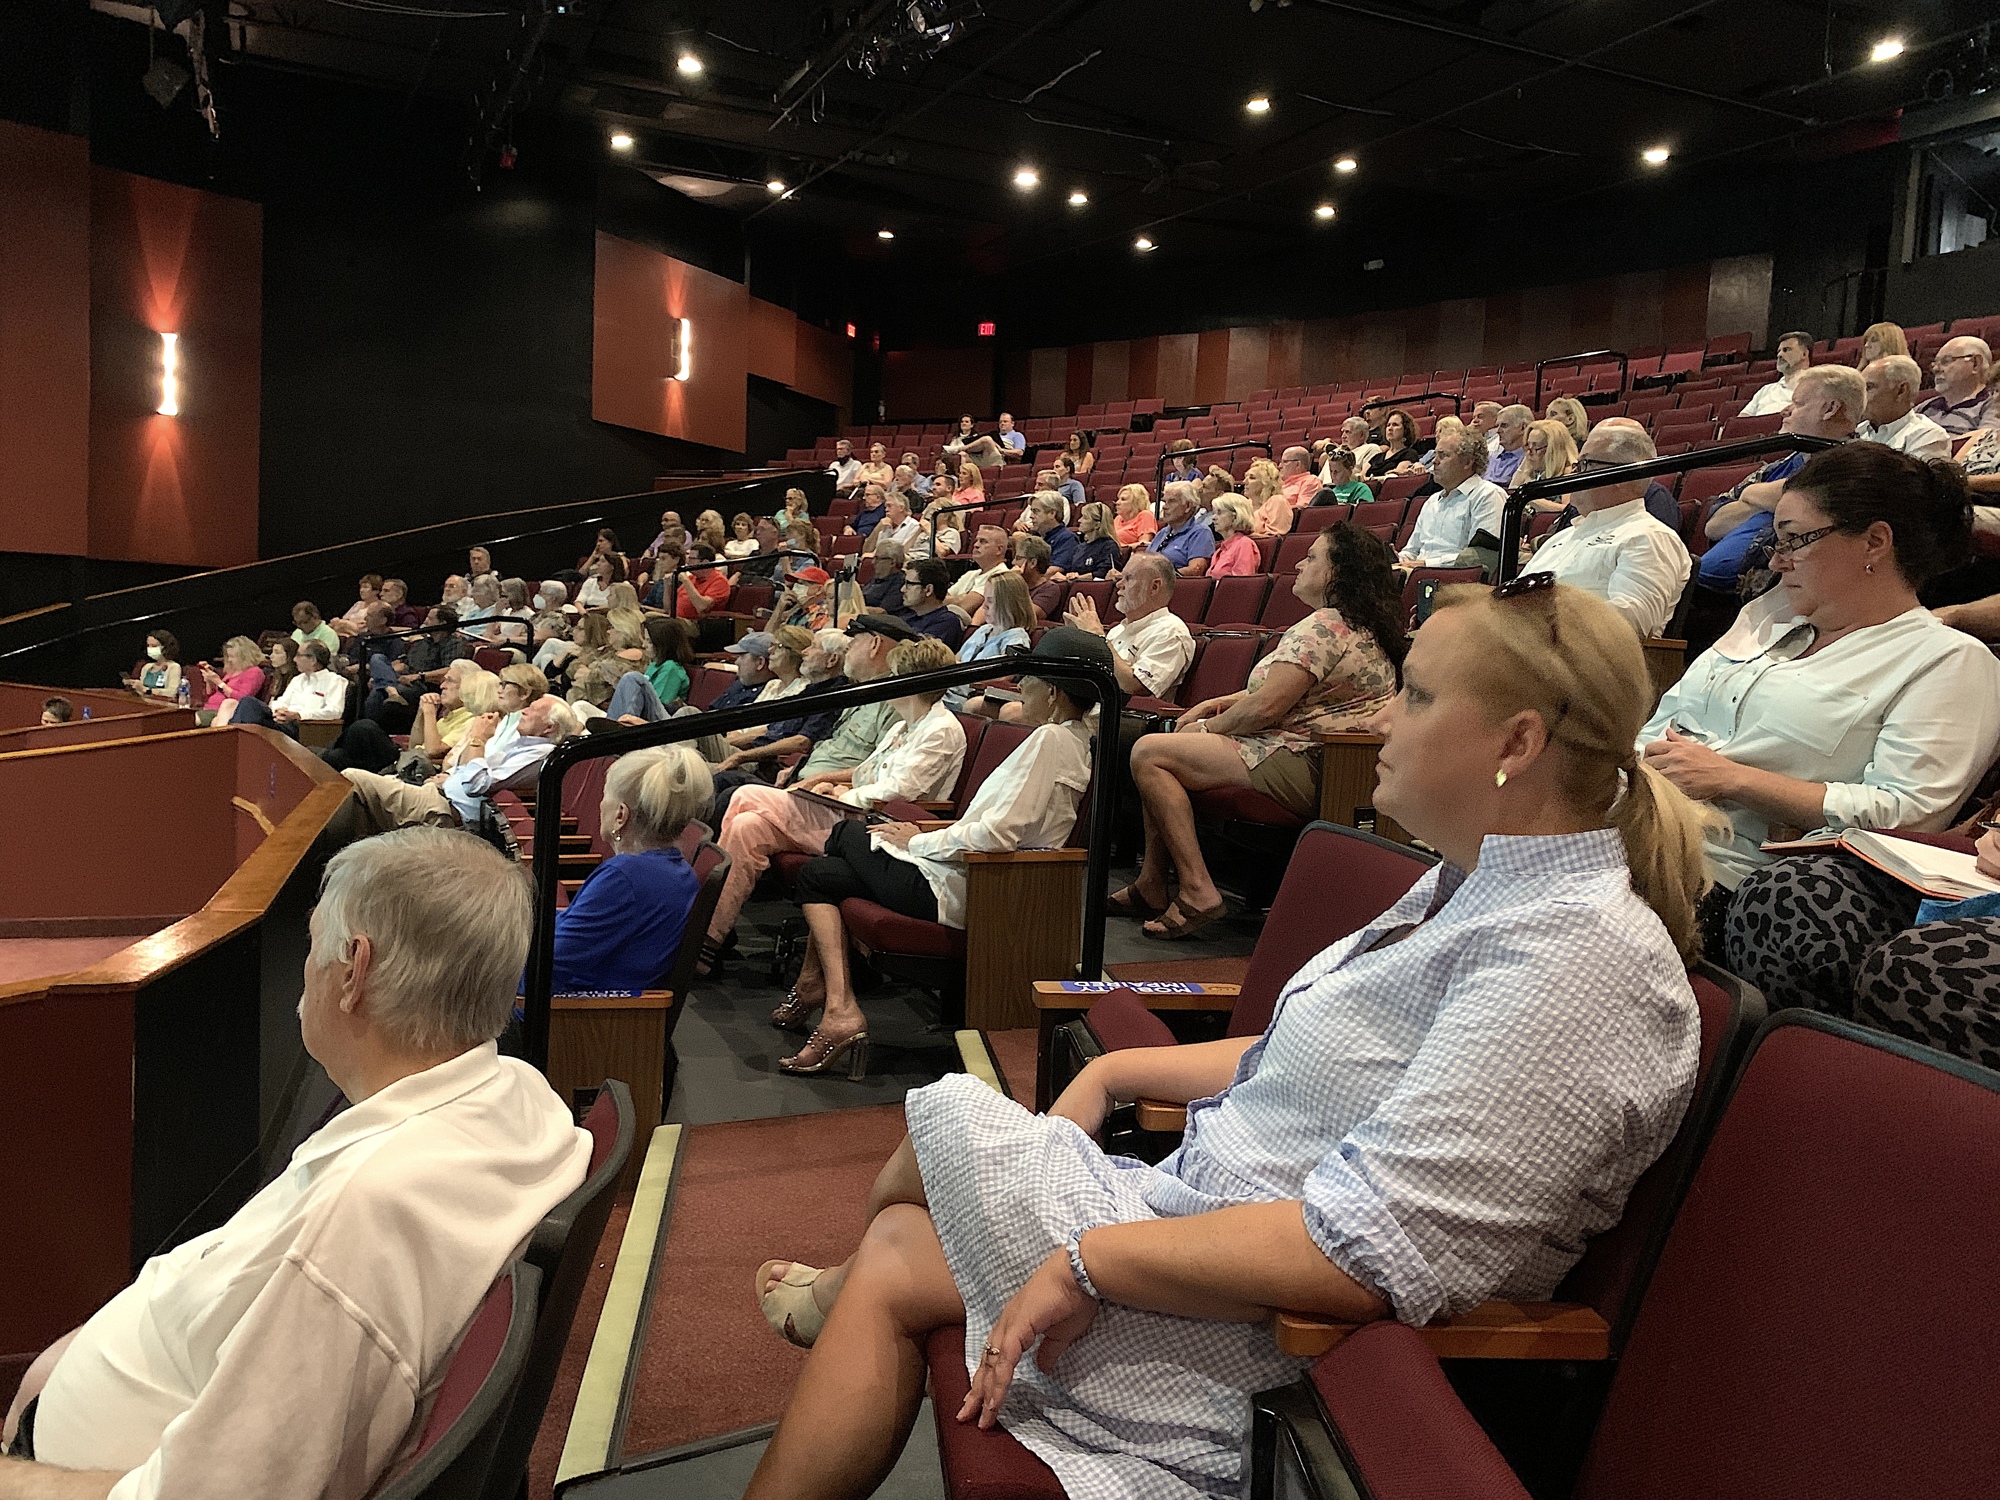 Over 100 attended the meeting at the Performing Arts Center.